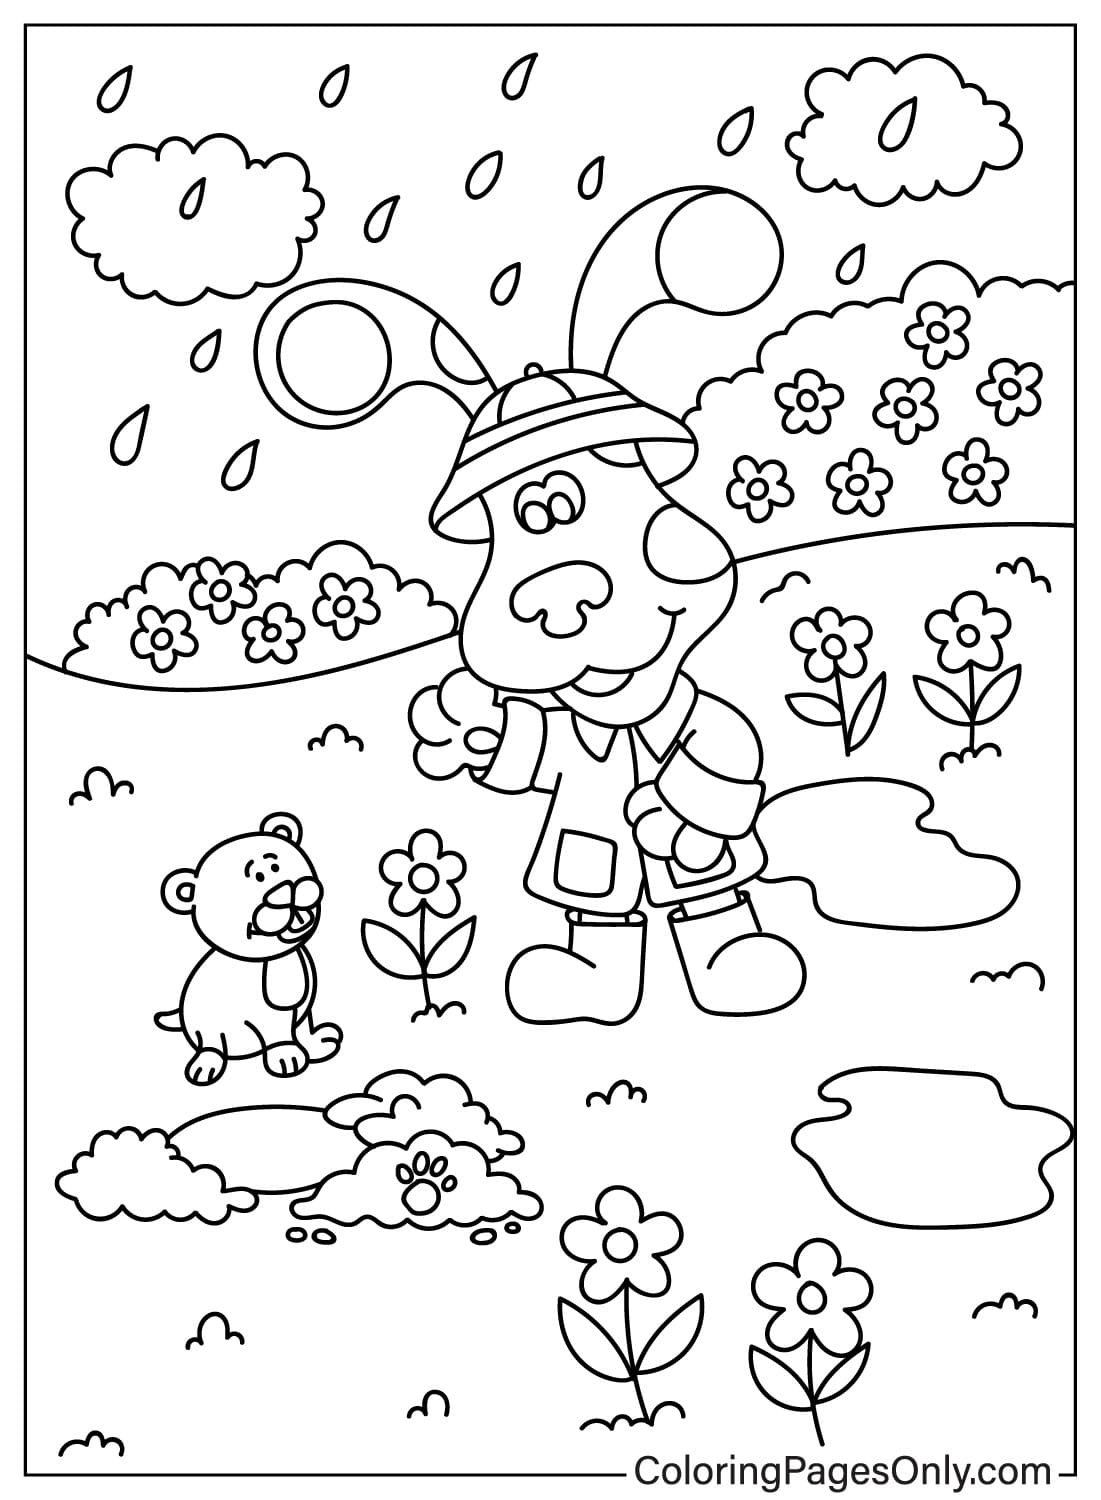 Blue’s Clues Coloring Page Free Printable from Blue's Clues